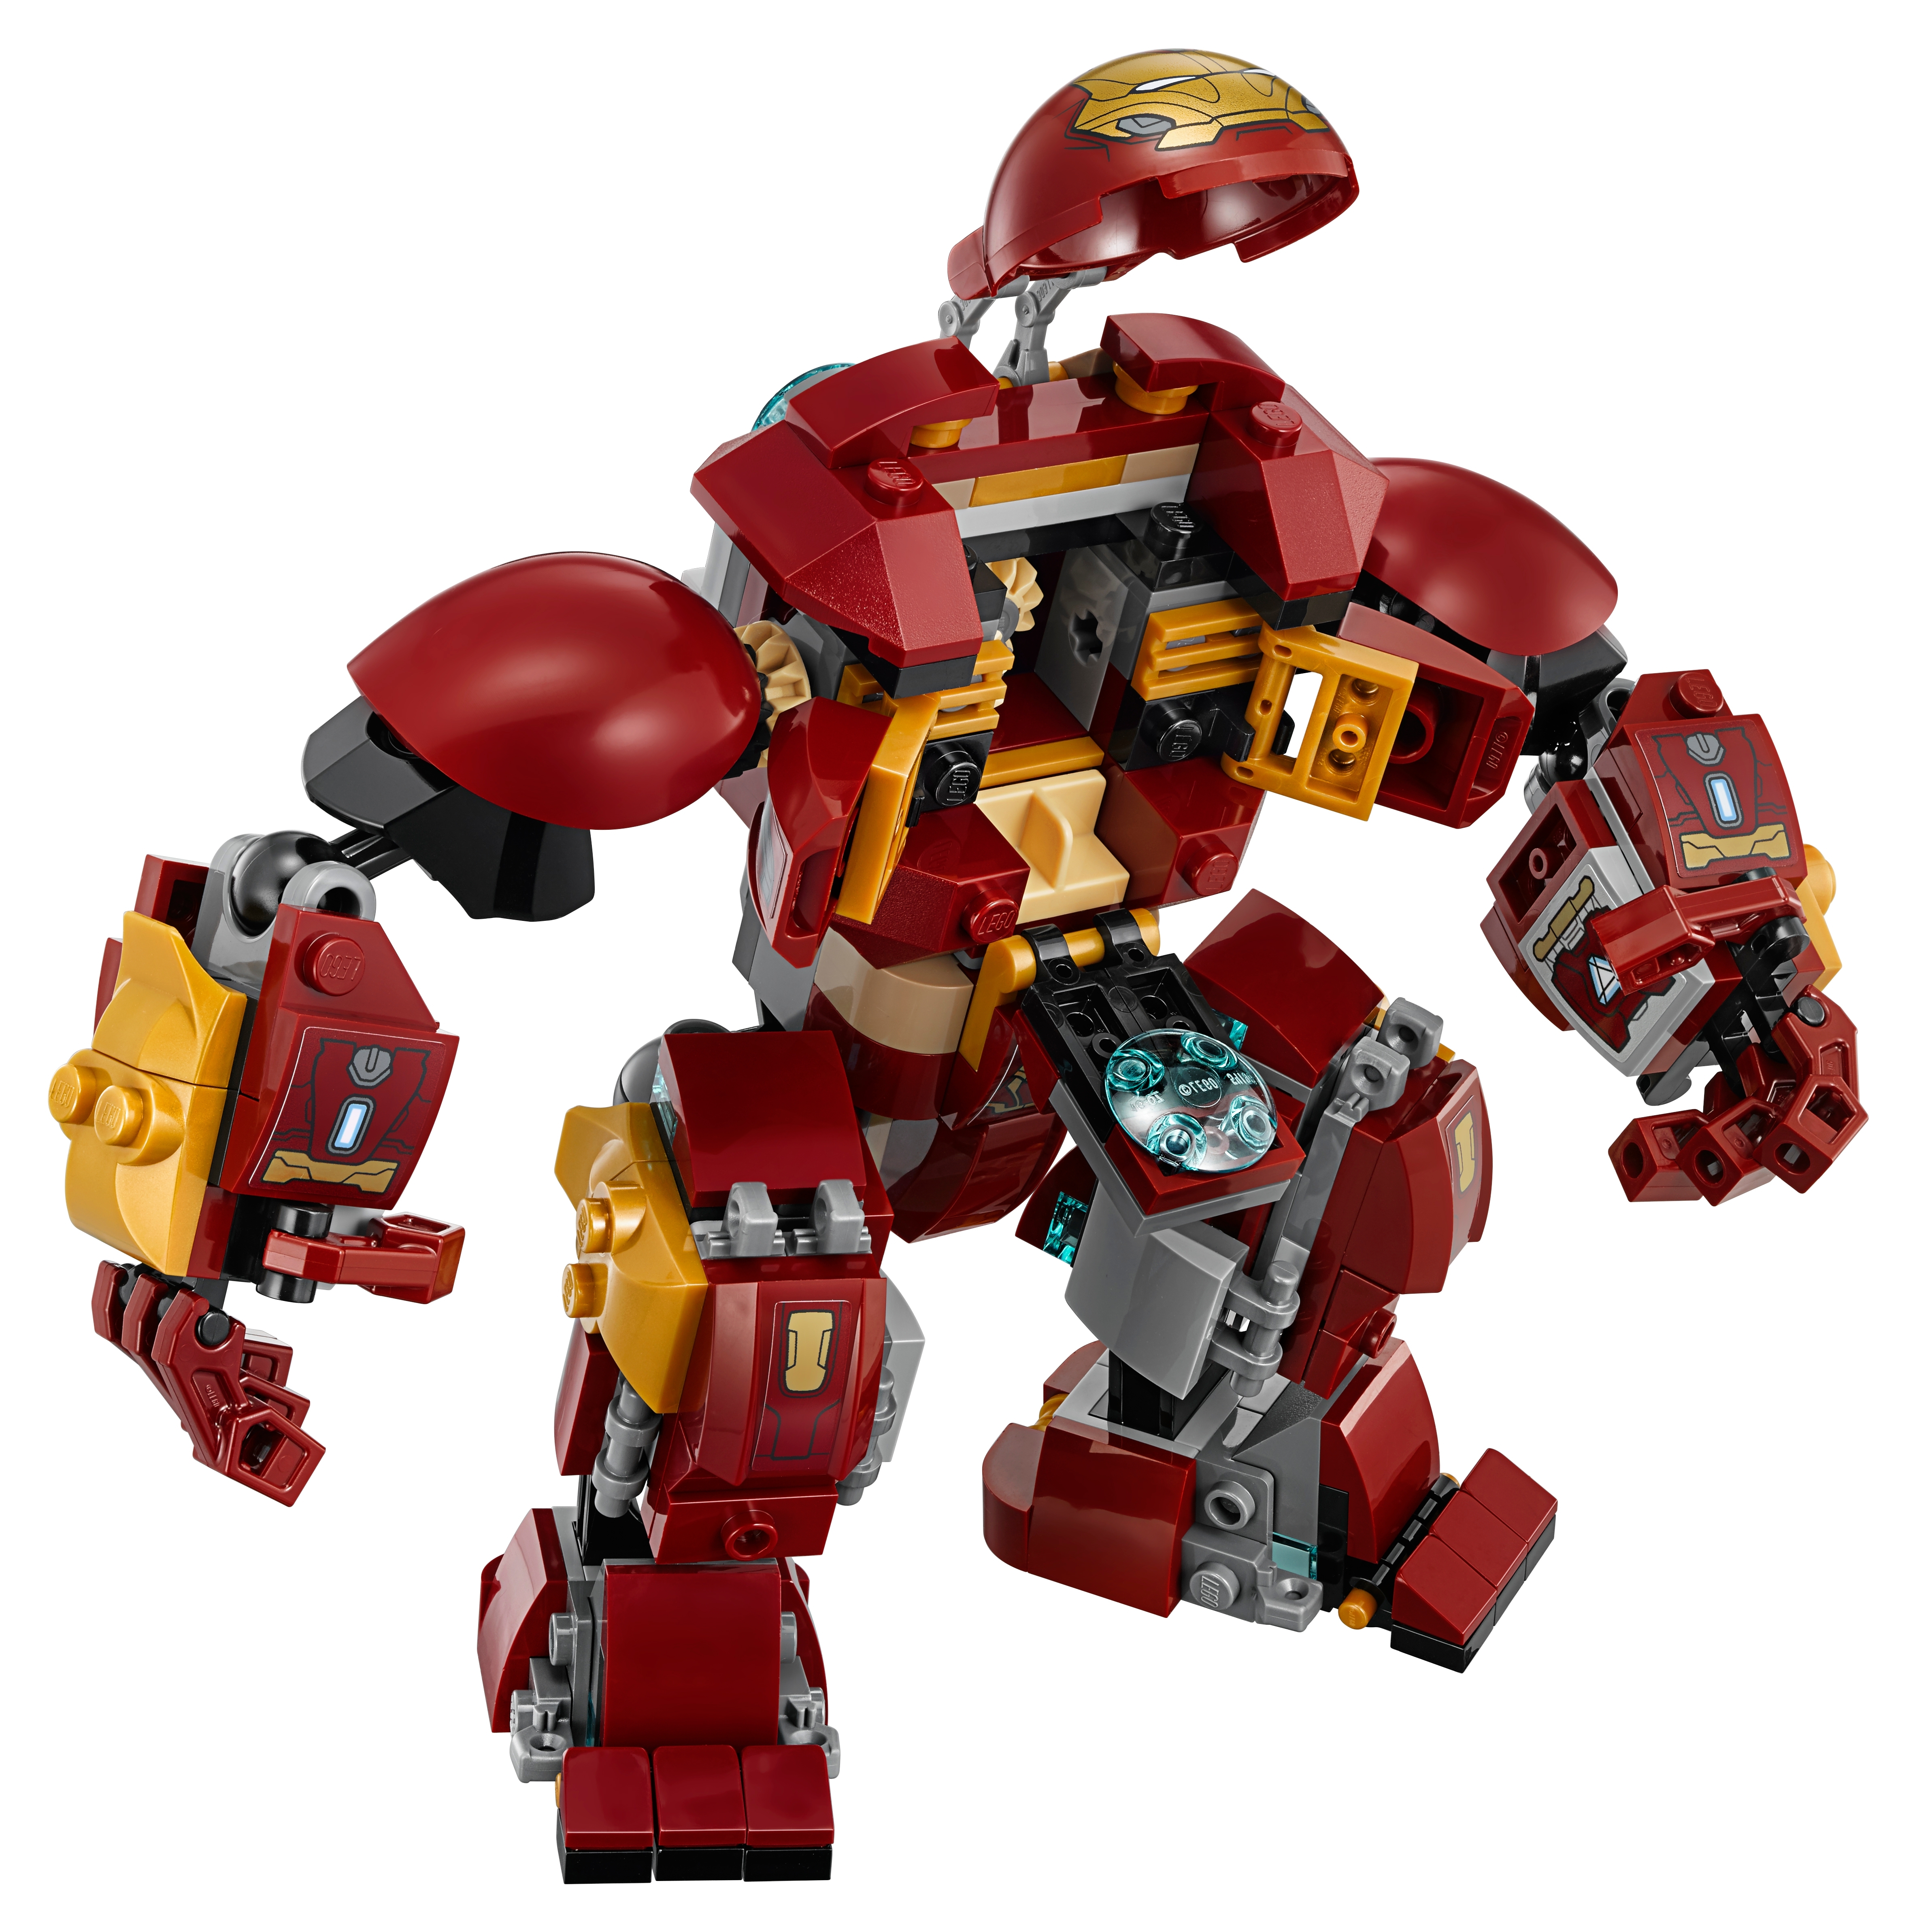 LEGO Marvel Super Heroes Avengers: Infinity War The Hulkbuster Smash-Up  76104 Building Kit features Proxima Midnight, Outrider, and Bruce Banner